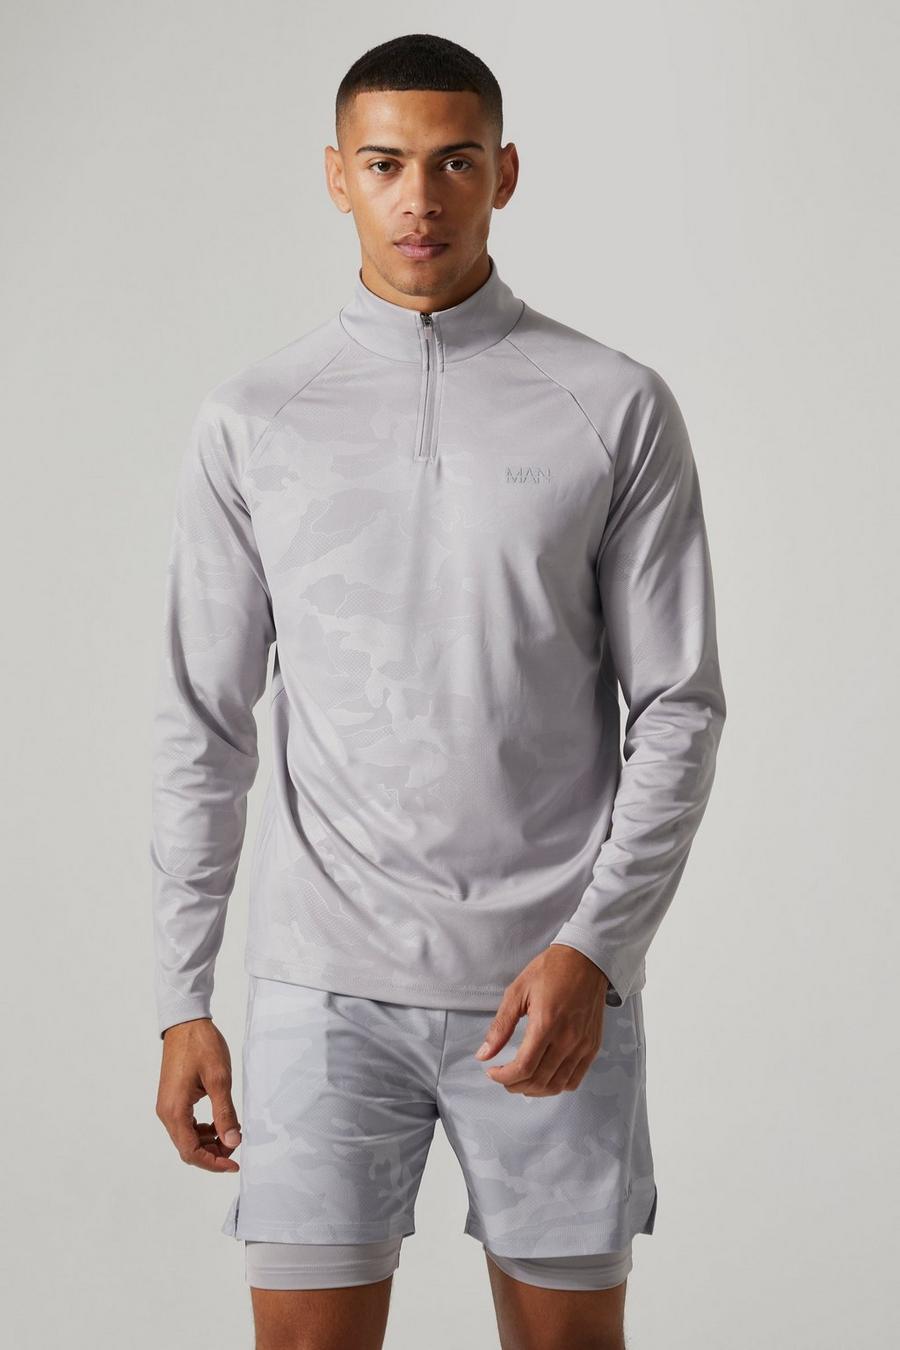 Light grey For The North Face Cyclone Jacket